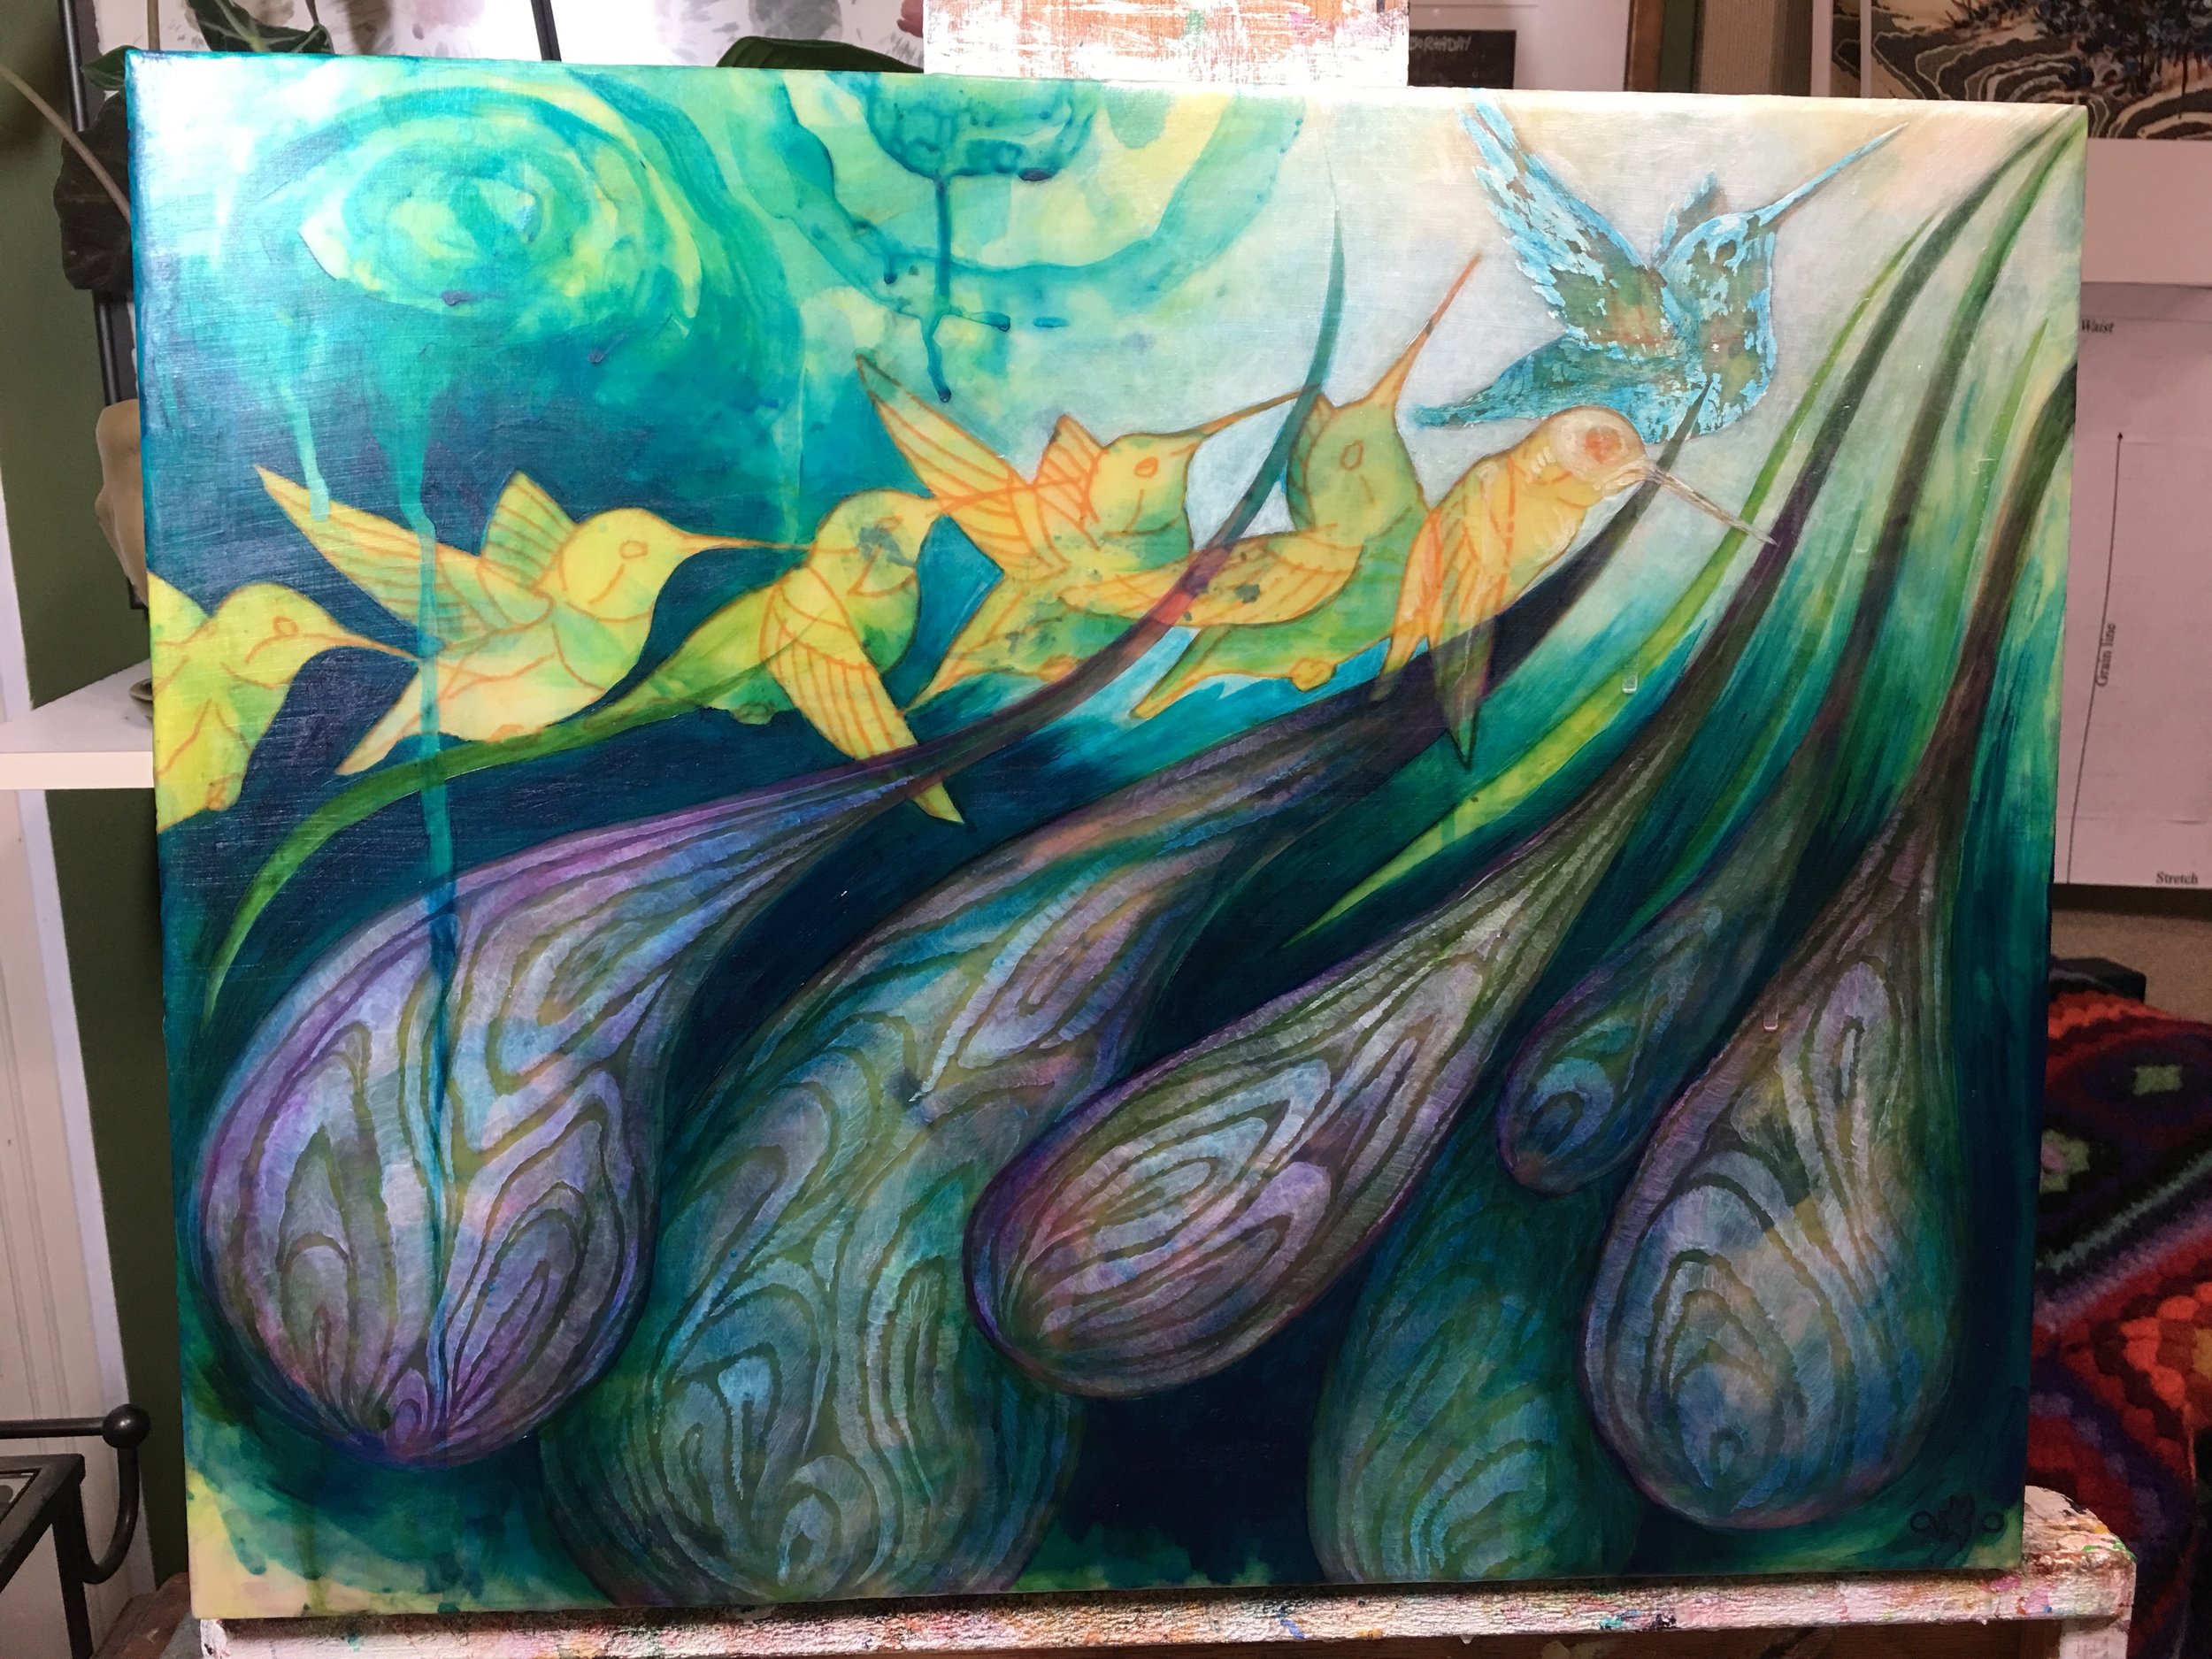  brought the Turquoise Deep into other areas of the piece to darken the purples around the onions.